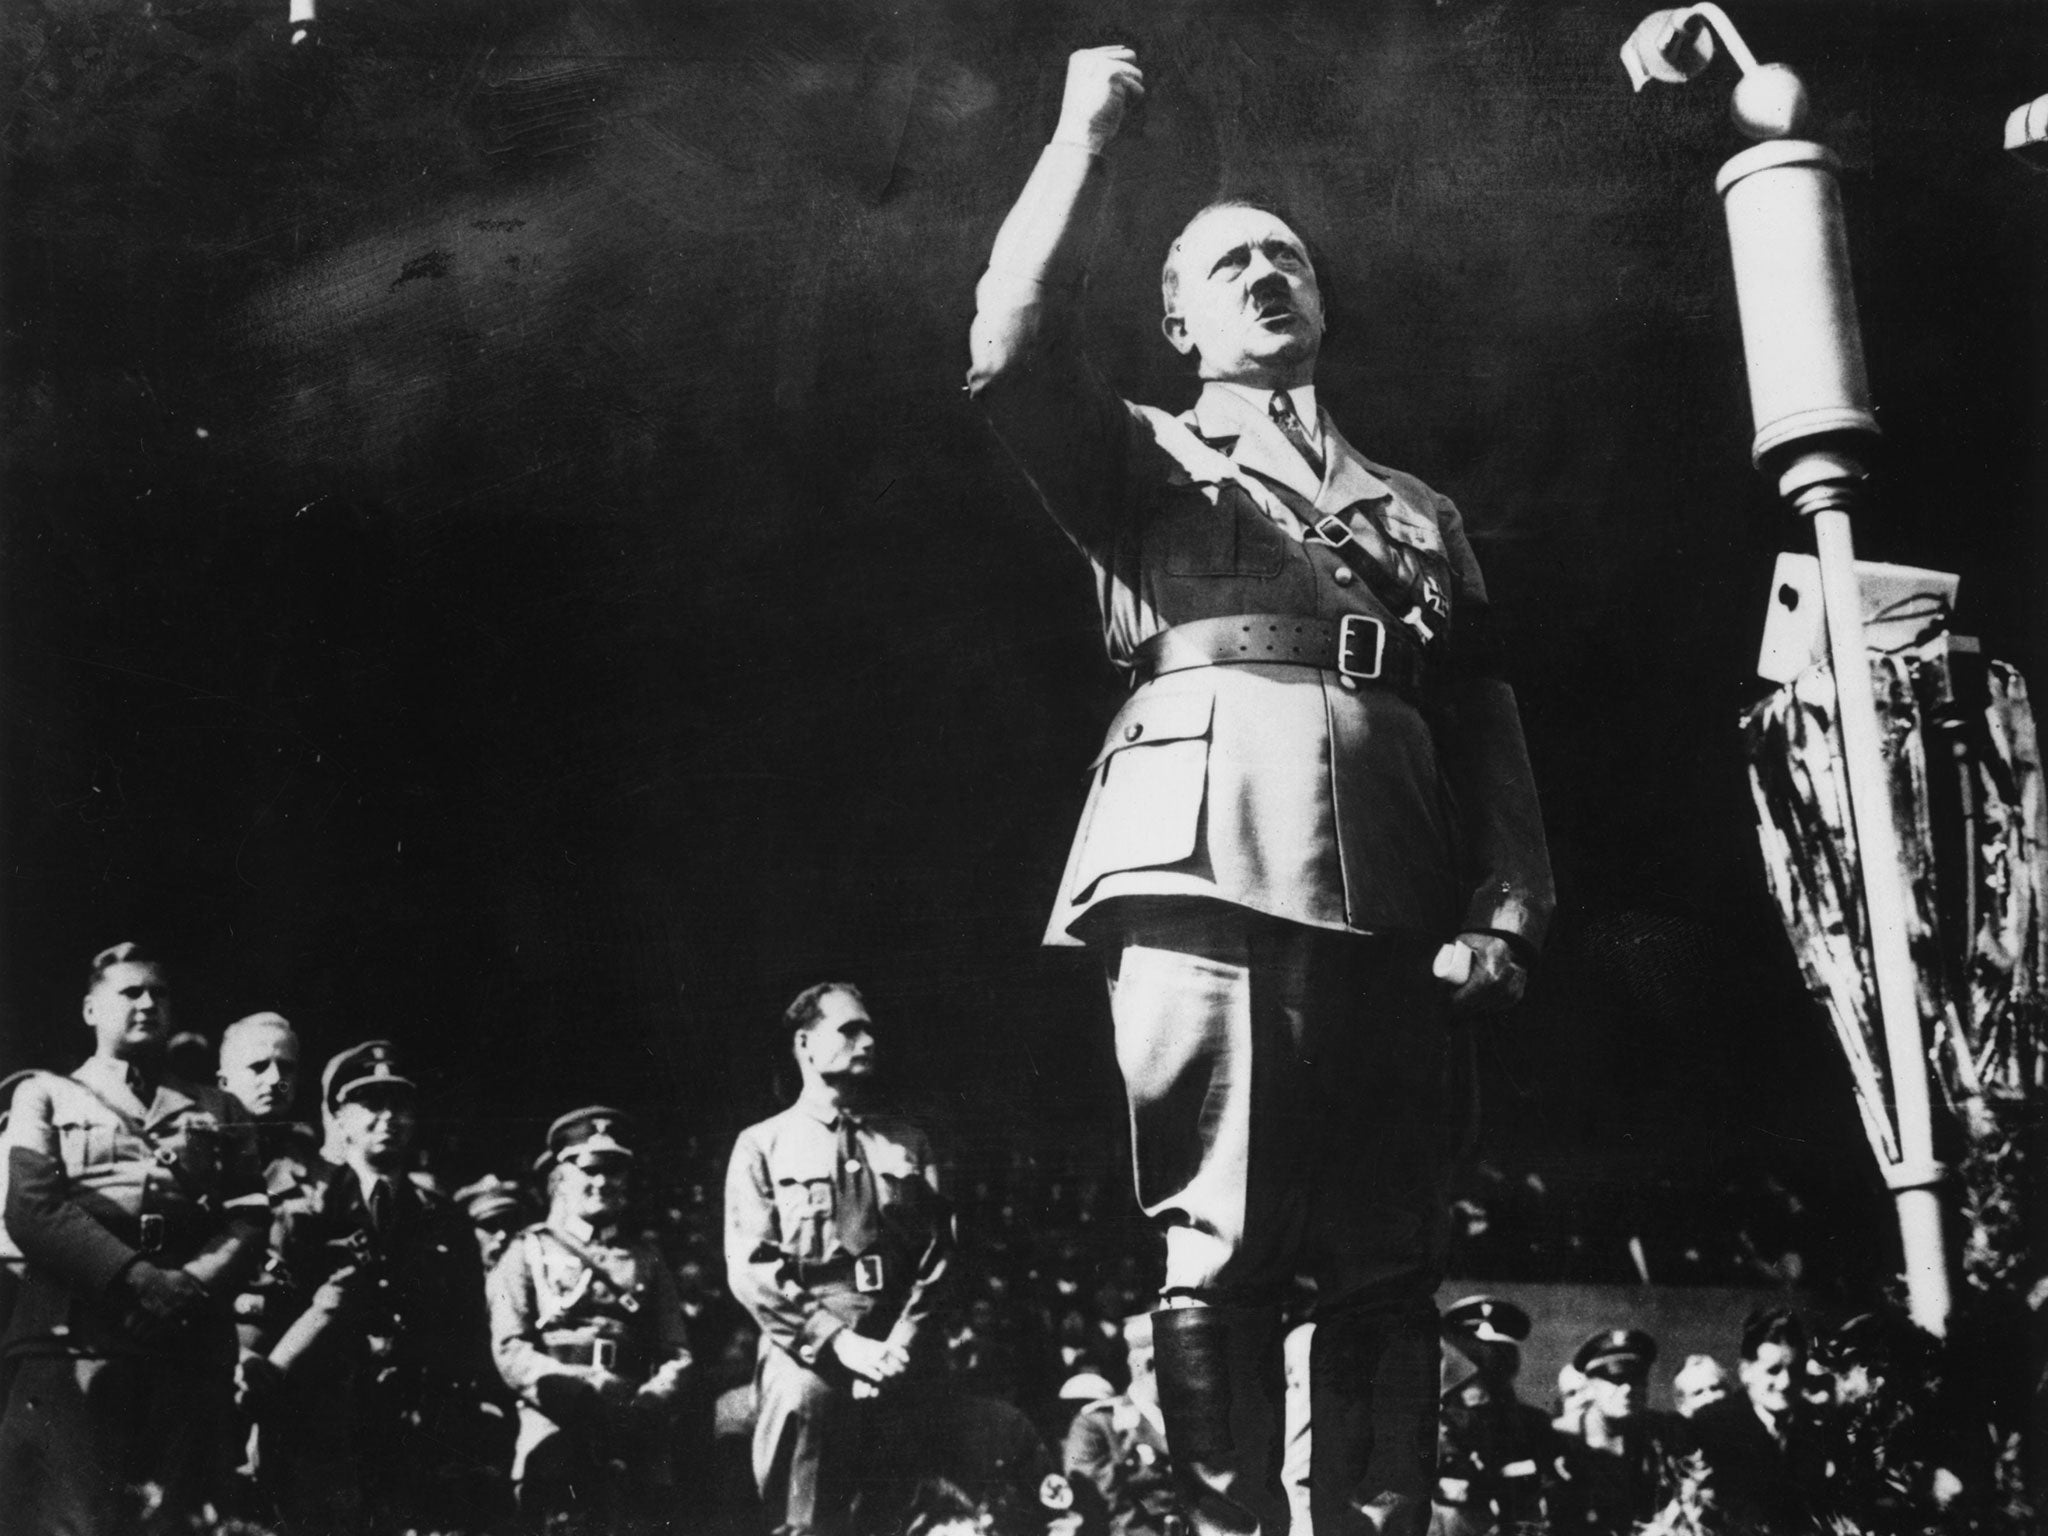 The rise to power of Adolf Hitler caused thousands to flee Nazi Germany